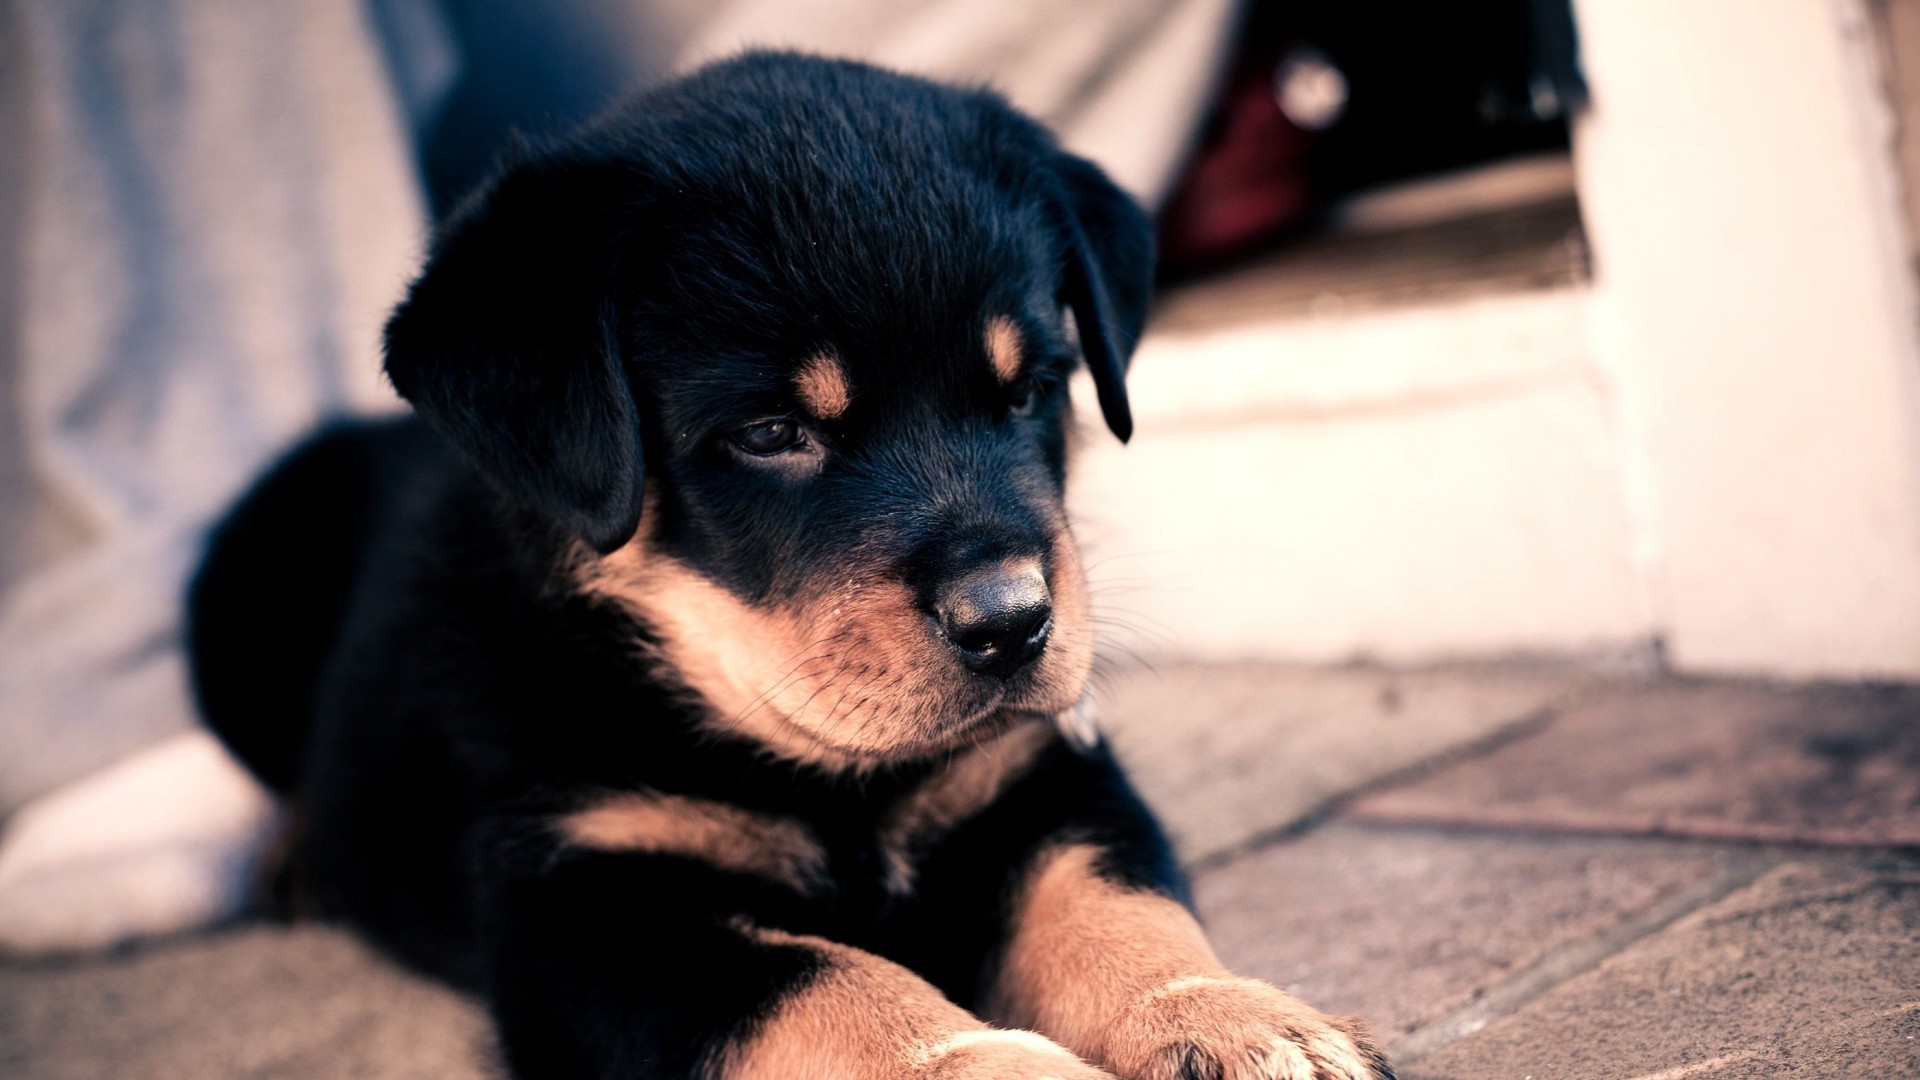 300+] Puppy Wallpapers | Wallpapers.com